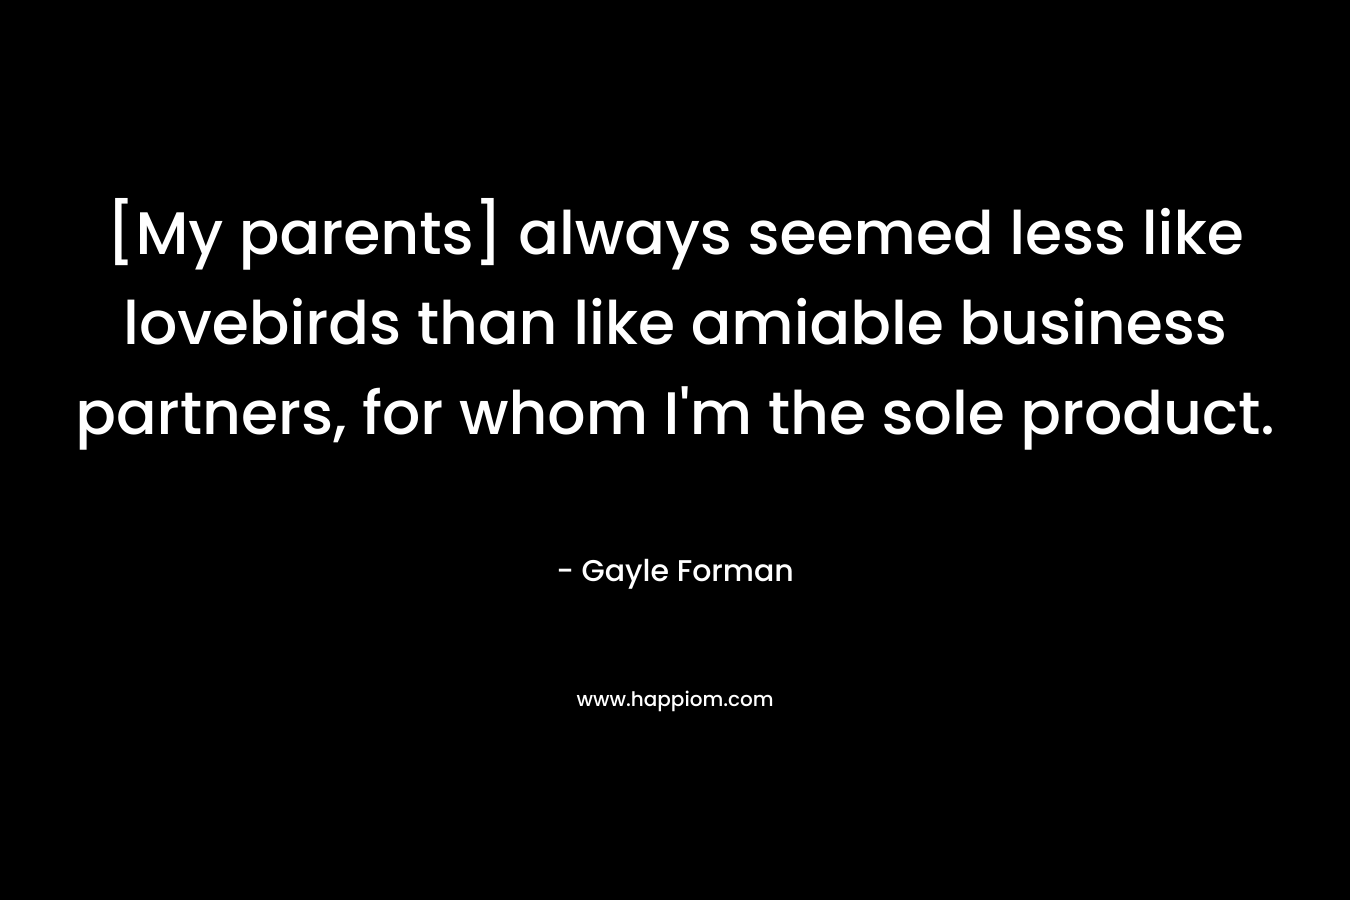 [My parents] always seemed less like lovebirds than like amiable business partners, for whom I’m the sole product. – Gayle Forman